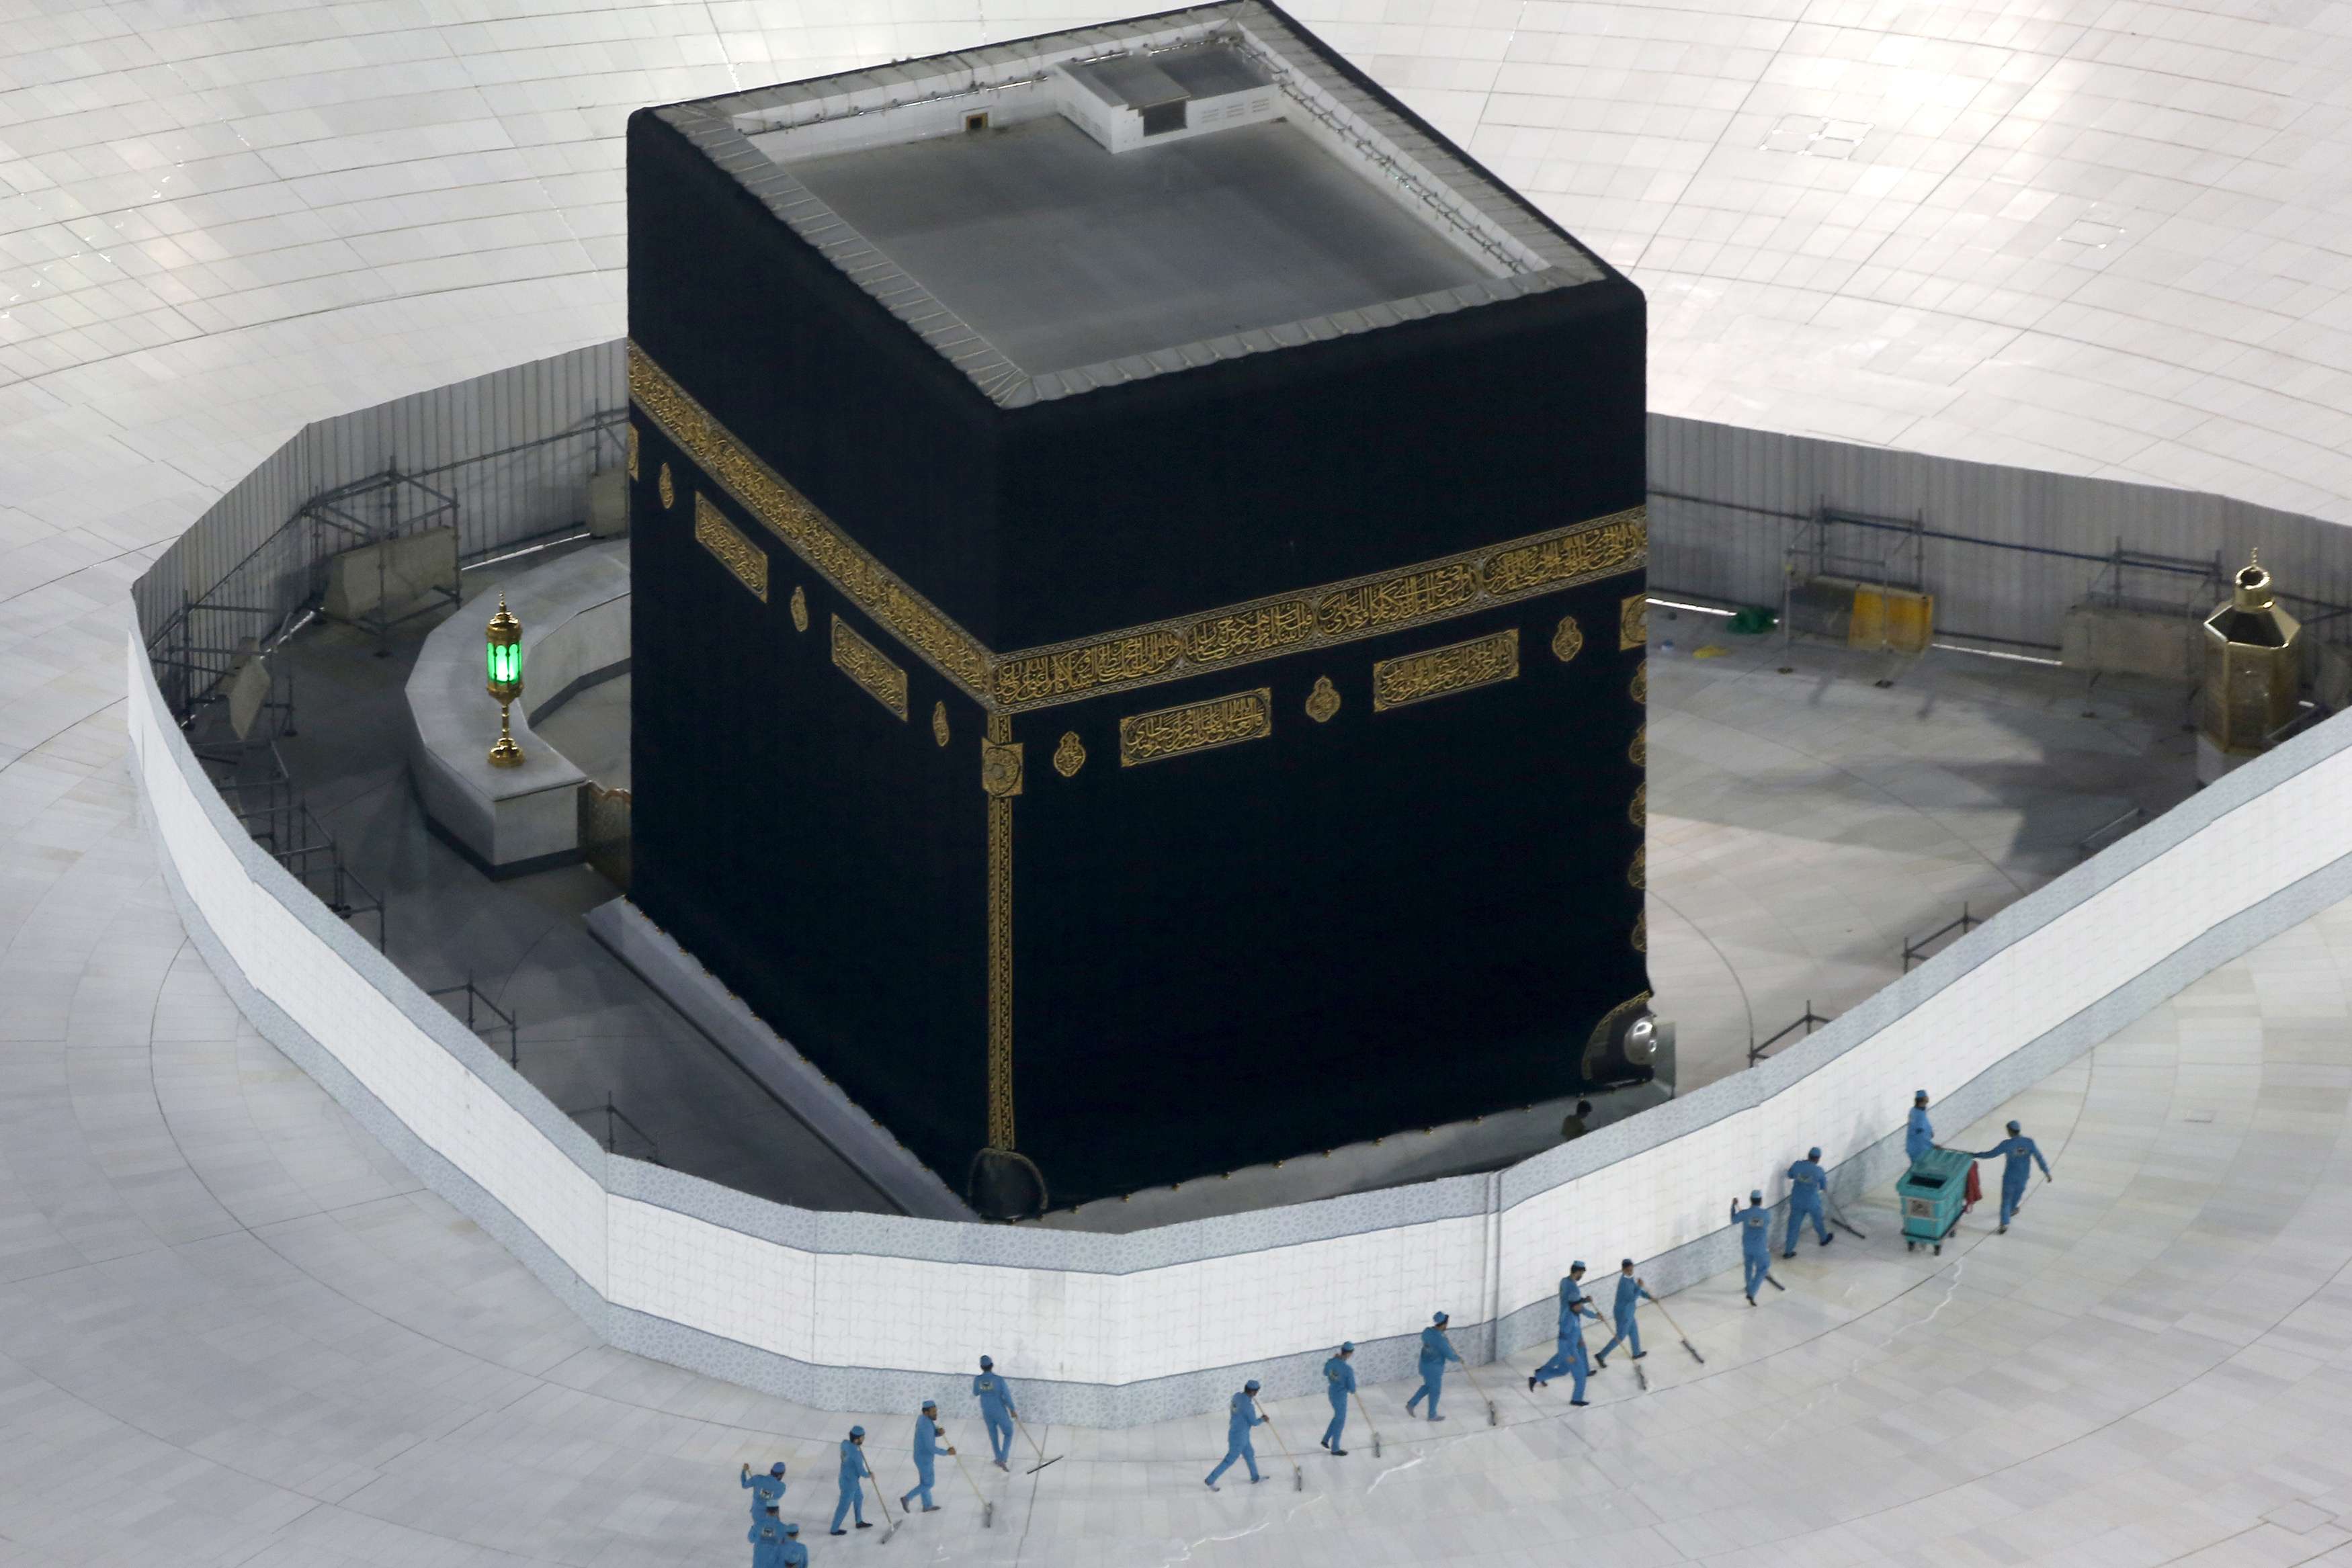 Workers disinfect the ground around the Kaaba in Mecca